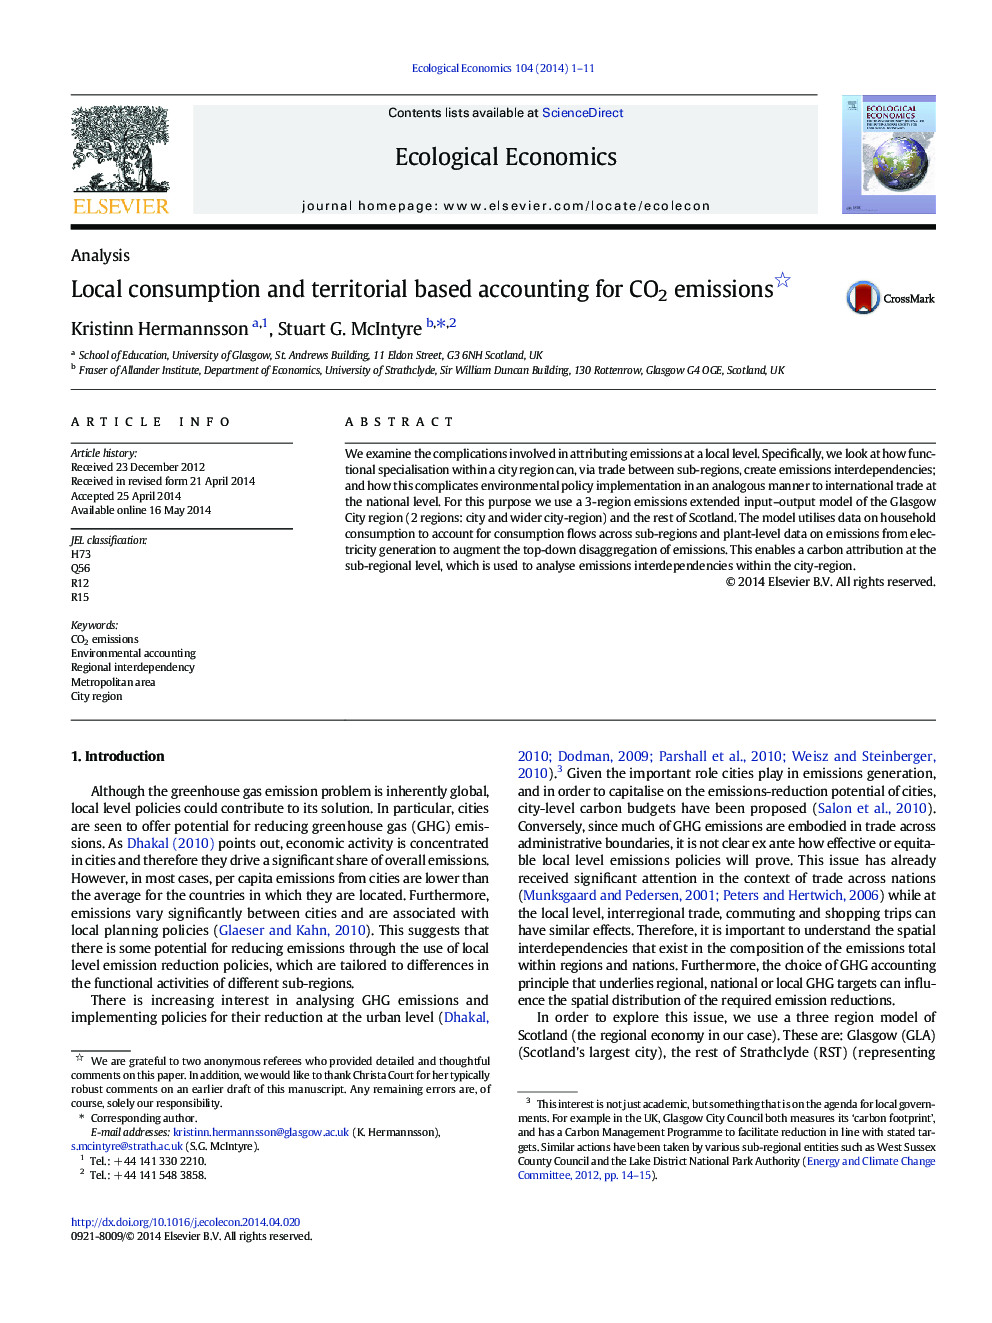 Local consumption and territorial based accounting for CO2 emissions